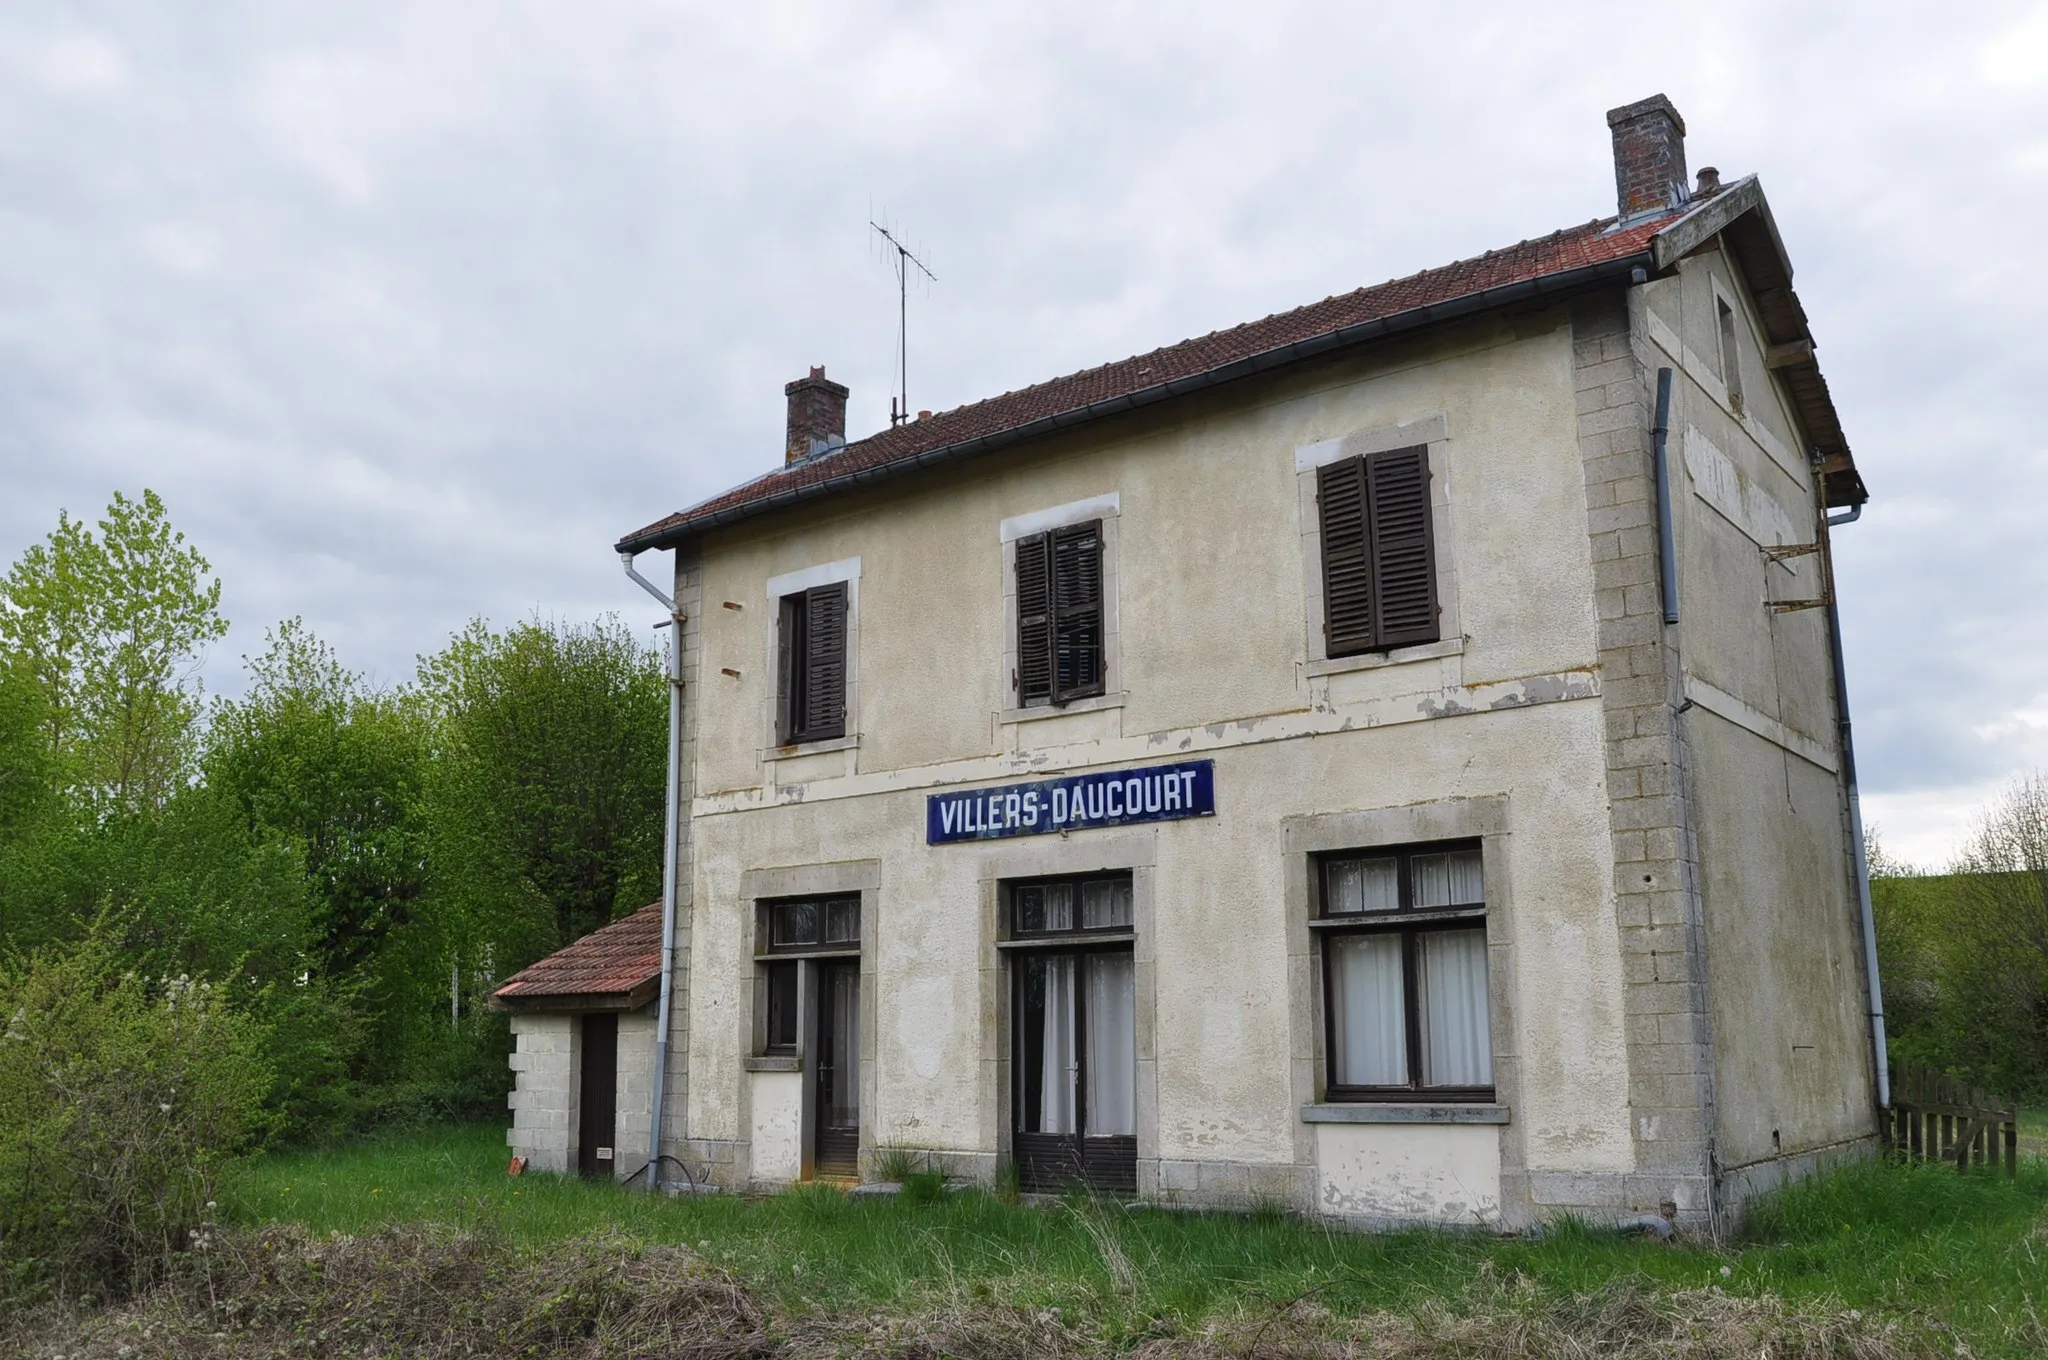 Photo showing: Abandoned railway station of Villers-en-Argonne/Daucourt. The station is located within the municipality of Châtrices (Marne department, France).